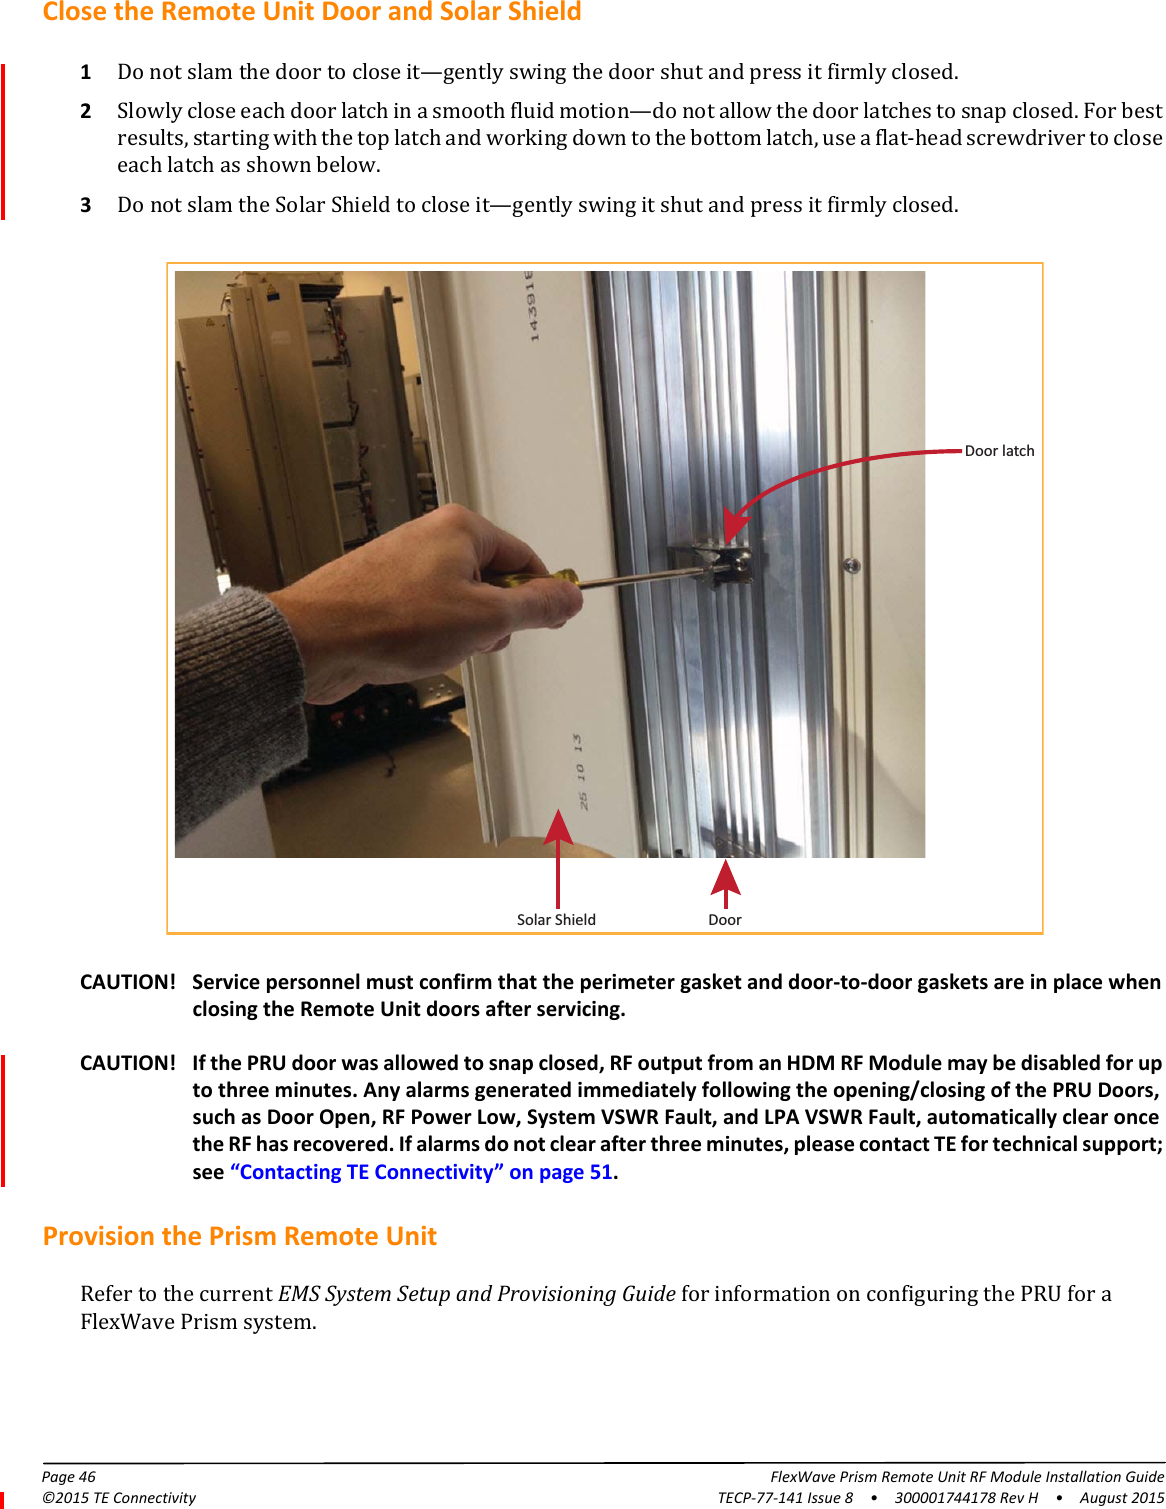 Page 46 FlexWave Prism Remote Unit RF Module Installation Guide©2015 TE Connectivity TECP-77-141 Issue 8  •  300001744178 Rev H  •  August 2015Close the Remote Unit Door and Solar Shield1Do not slam the door to close it—gently swing the door shut and press it firmly closed. 2Slowly close each door latch in a smooth fluid motion—do not allow the door latches to snap closed. For best results, starting with the top latch and working down to the bottom latch, use a flat-head screwdriver to close each latch as shown below.3Do not slam the Solar Shield to close it—gently swing it shut and press it firmly closed. Solar Shield DoorDoor latchCAUTION! Service personnel must confirm that the perimeter gasket and door-to-door gaskets are in place when closing the Remote Unit doors after servicing.CAUTION! If the PRU door was allowed to snap closed, RF output from an HDM RF Module may be disabled for up to three minutes. Any alarms generated immediately following the opening/closing of the PRU Doors, such as Door Open, RF Power Low, System VSWR Fault, and LPA VSWR Fault, automatically clear once the RF has recovered. If alarms do not clear after three minutes, please contact TE for technical support; see “Contacting TE Connectivity” on page 51.Provision the Prism Remote Unit Refer to the current EMS System Setup and Provisioning Guide for information on configuring the PRU for a FlexWave Prism system.